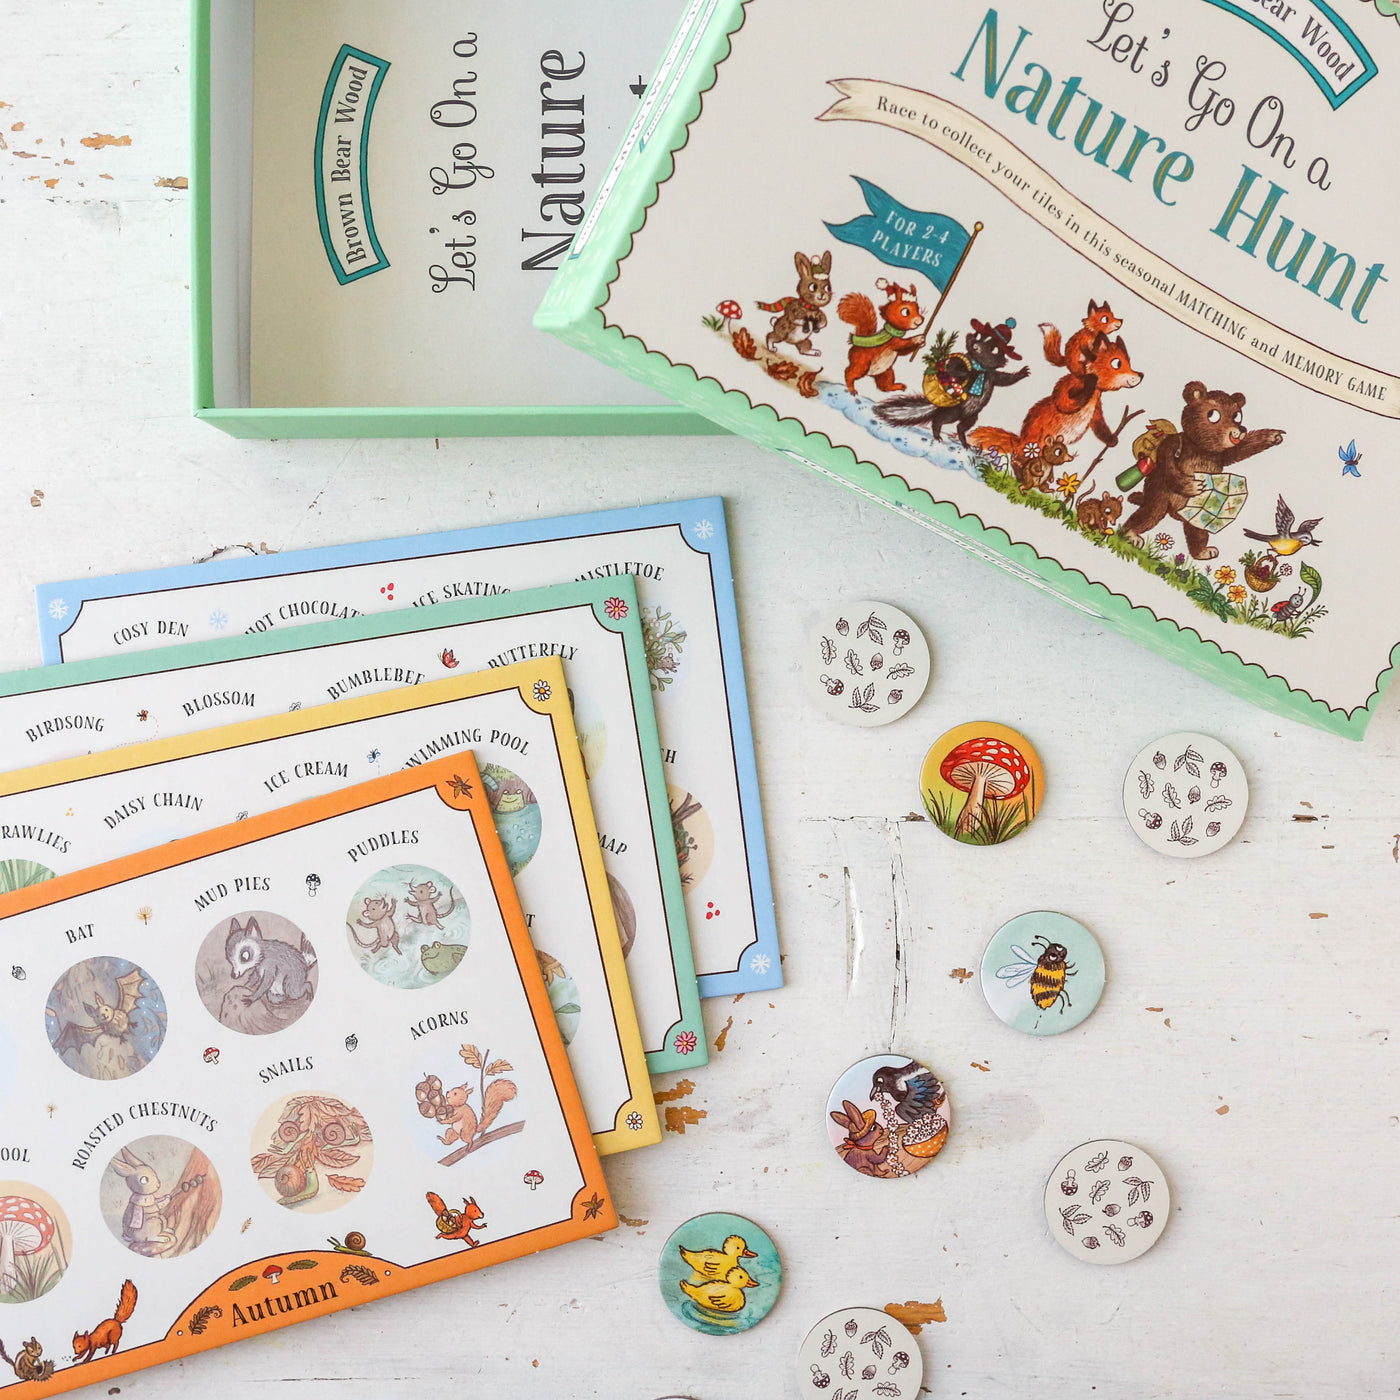 Let's Go On a Nature Hunt - Card Game